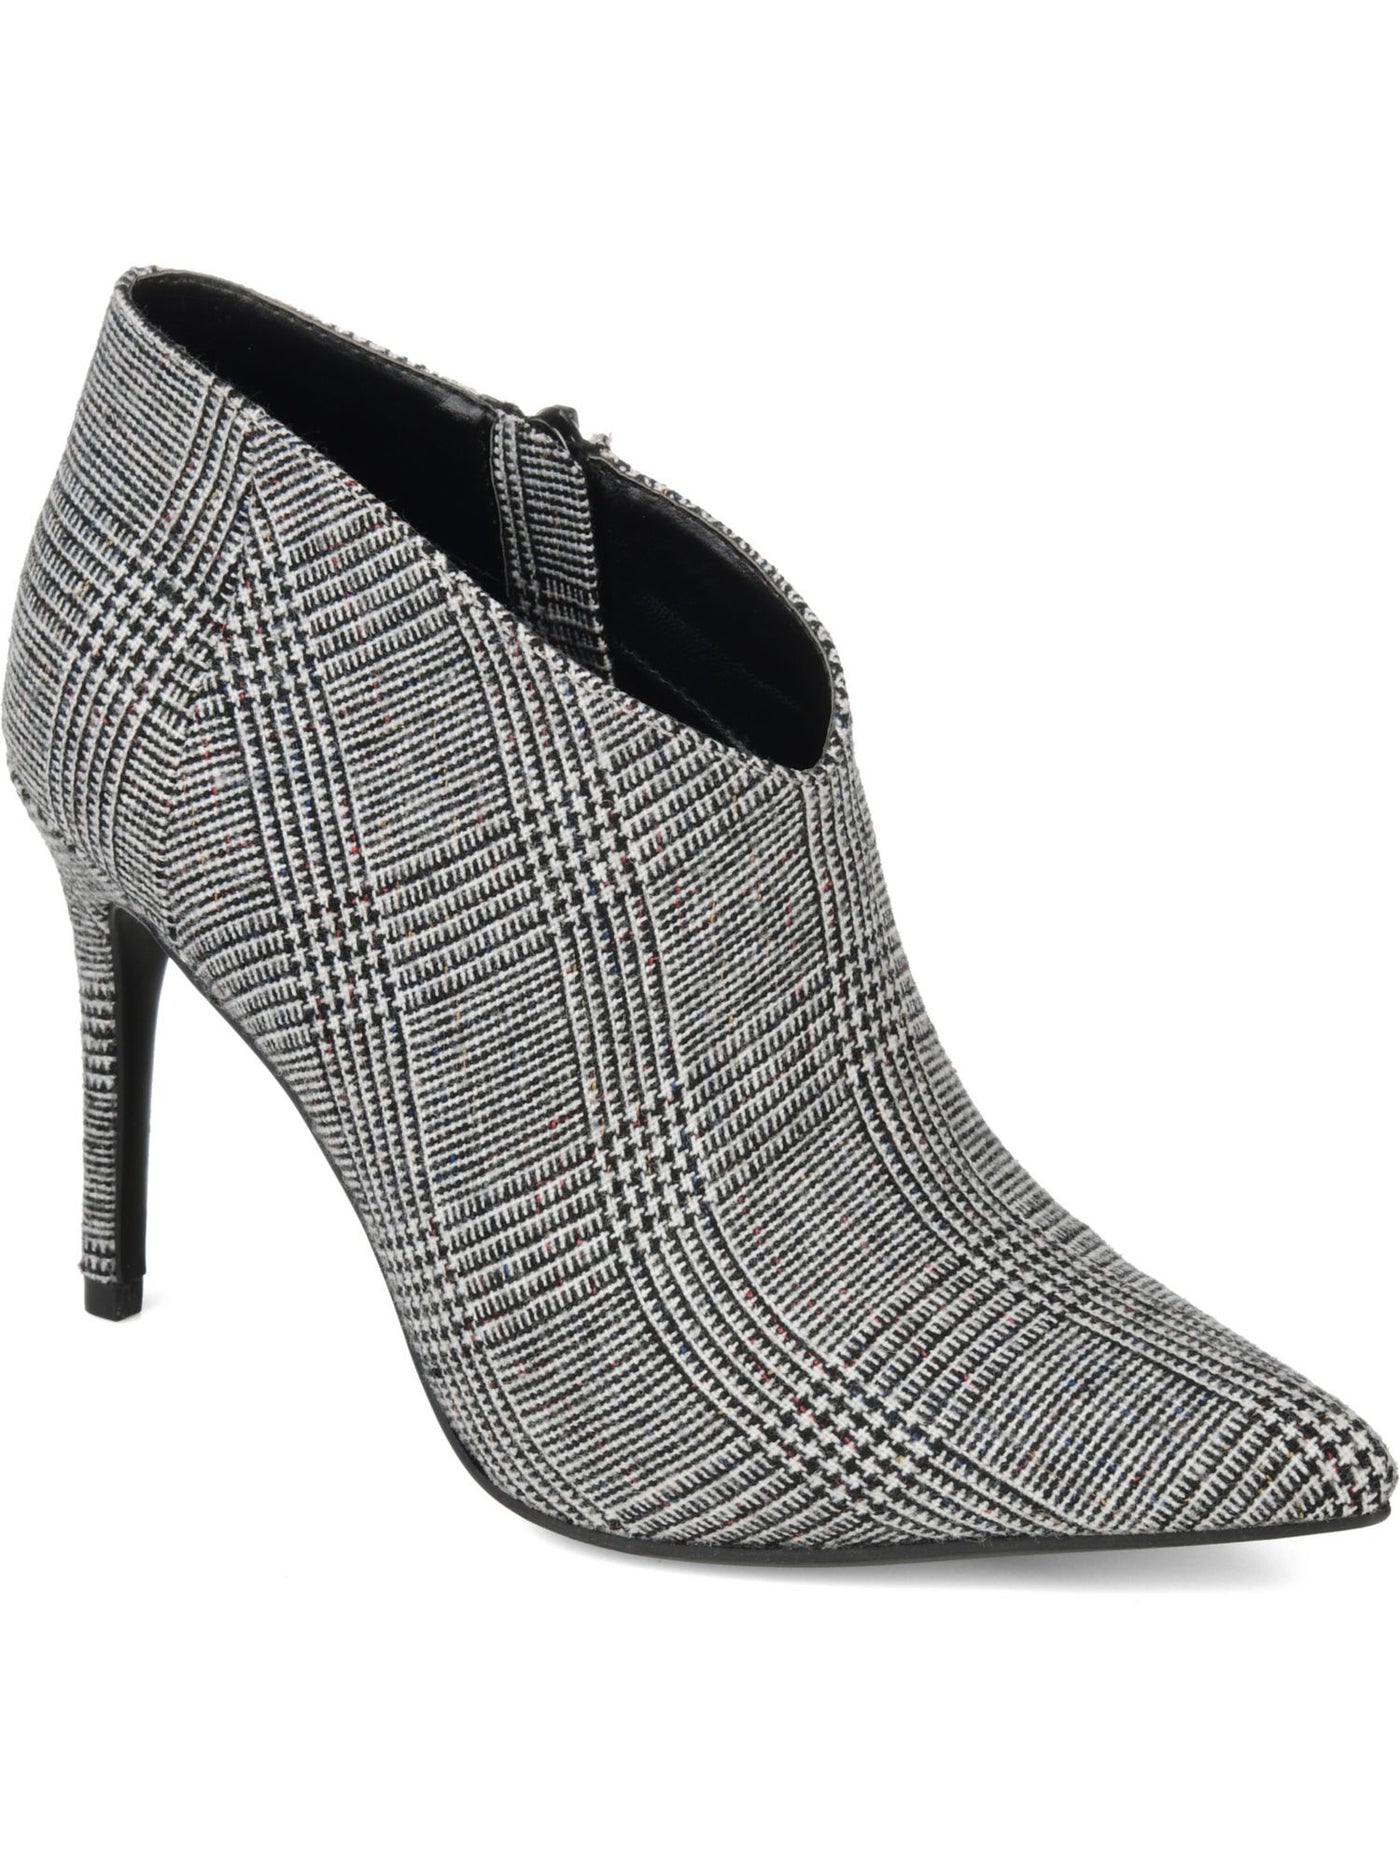 JOURNEE COLLECTION Womens Gray Gingham Padded Demmi Pointed Toe Stiletto Zip-Up Booties 8.5 M